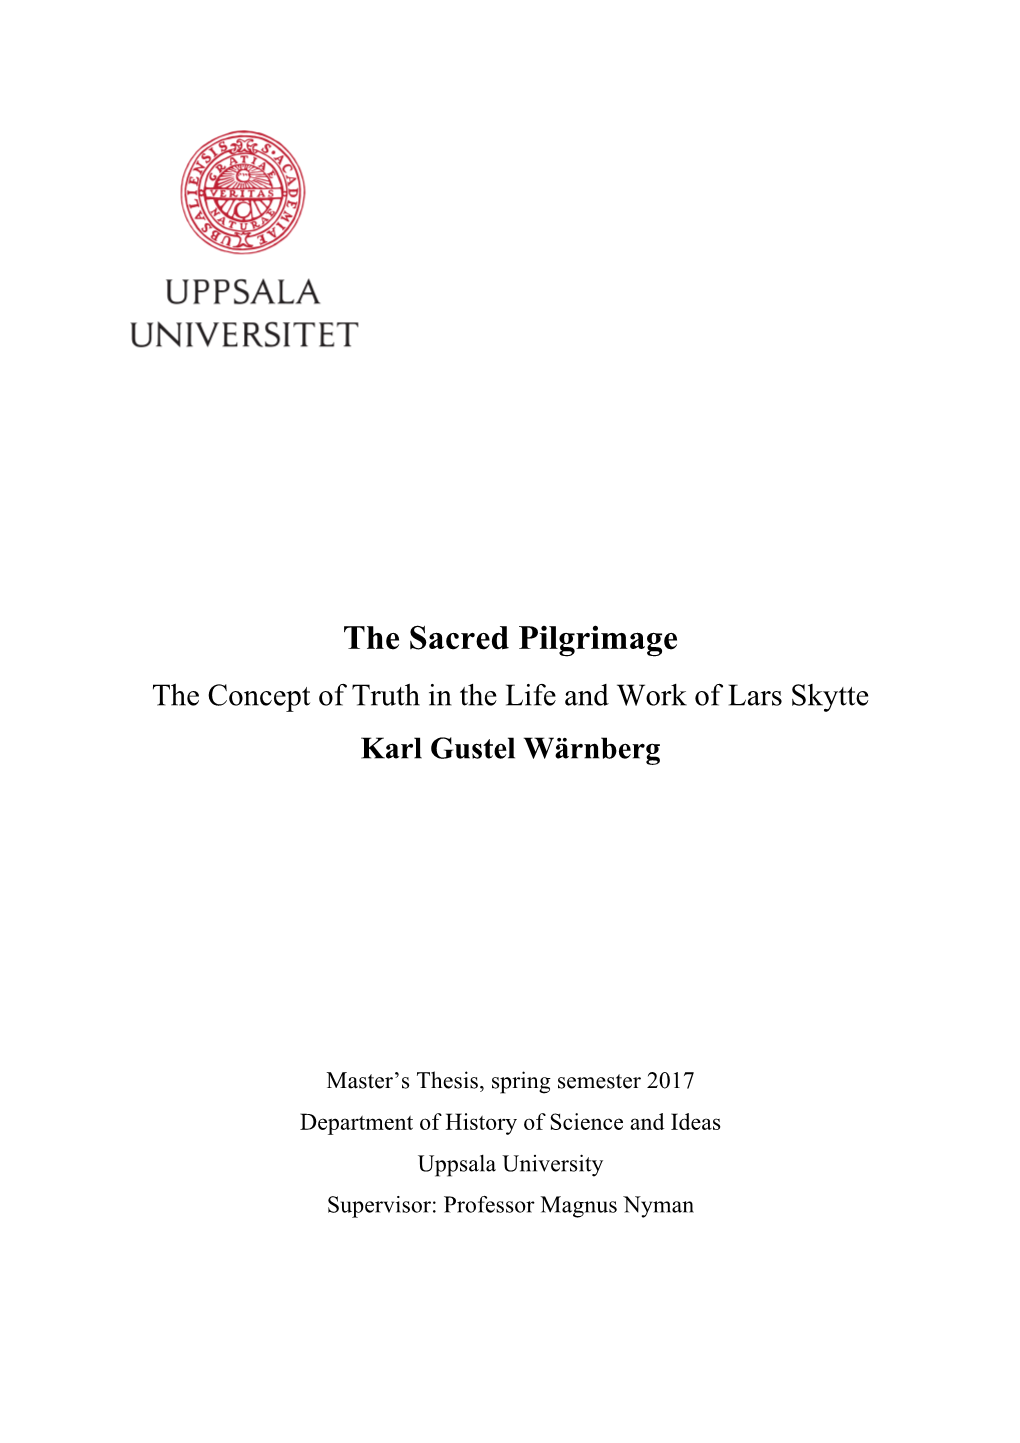 The Sacred Pilgrimage the Concept of Truth in the Life and Work of Lars Skytte Karl Gustel Wärnberg